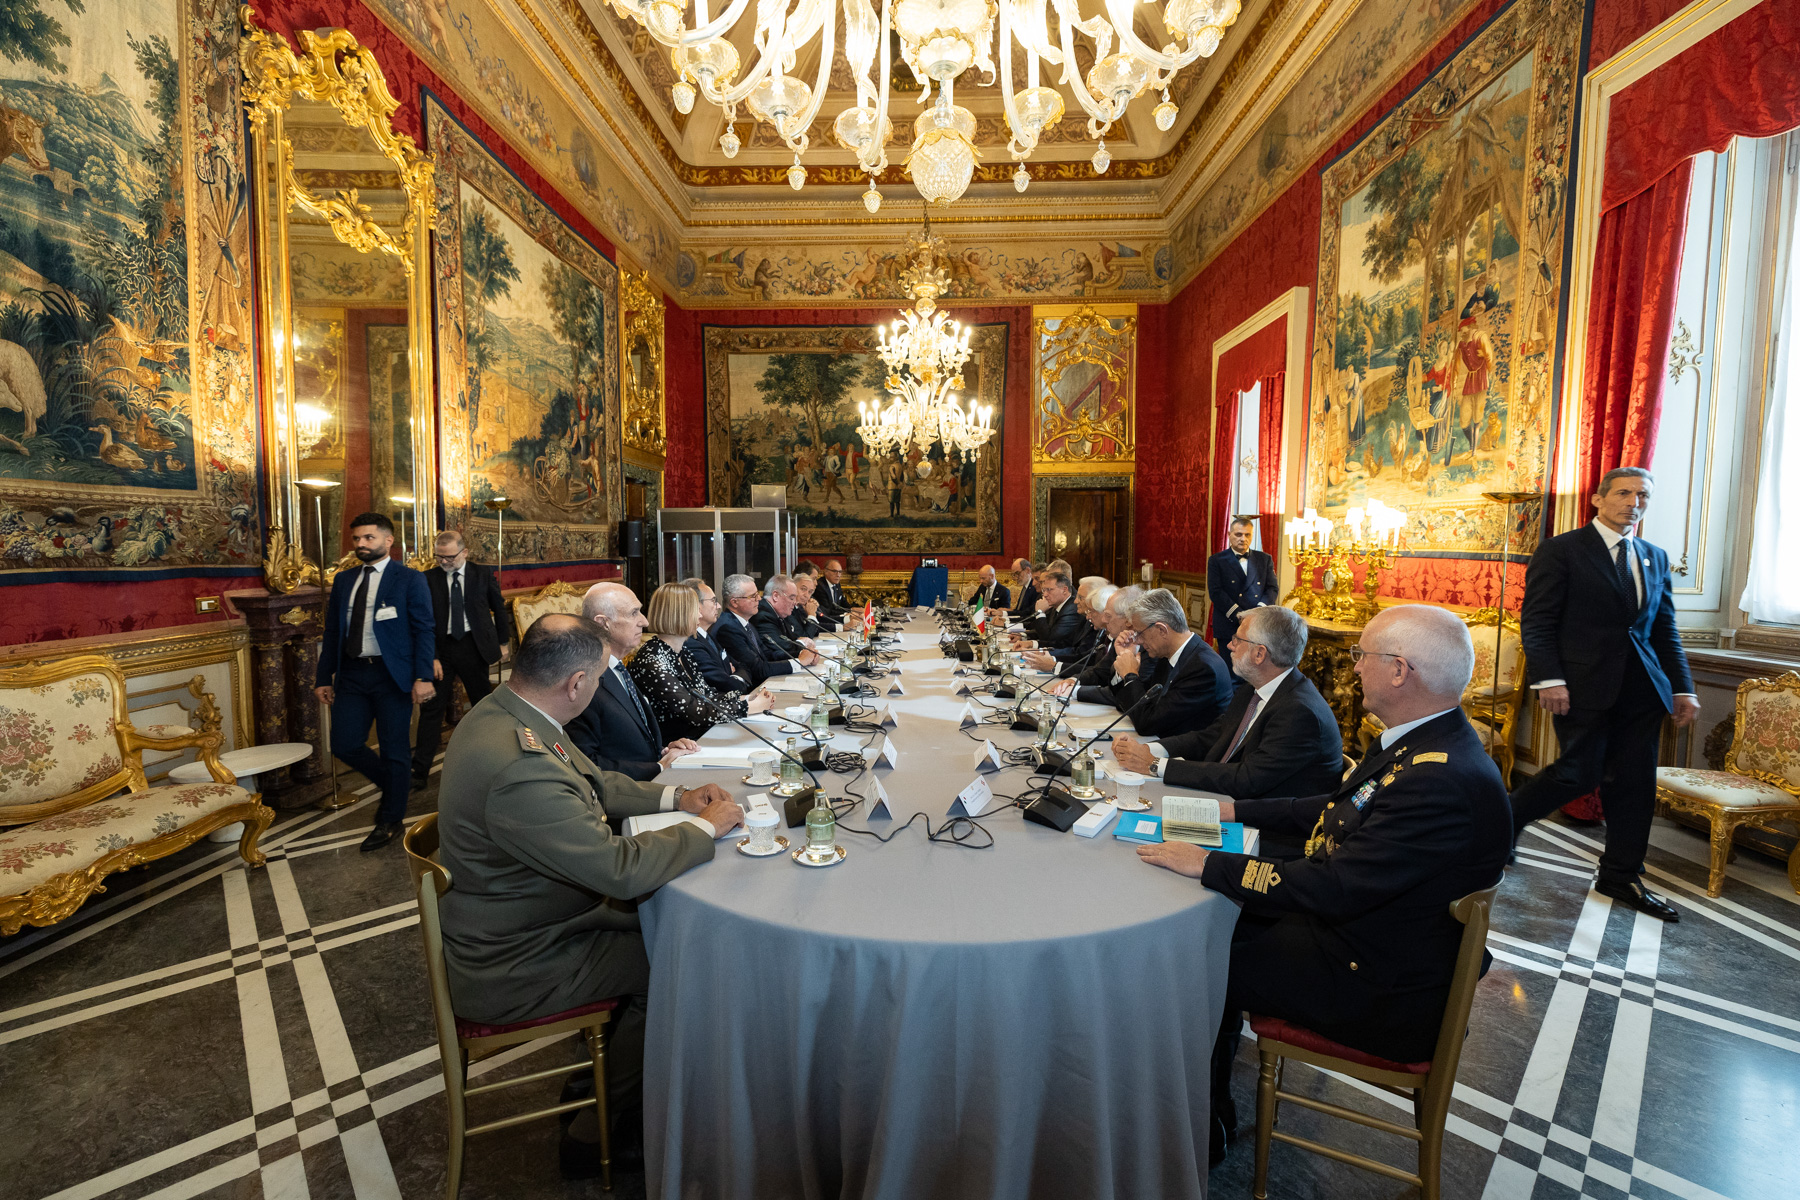 President Sergio Mattarella receives new Government of Sovereign Order of Malta on official visit